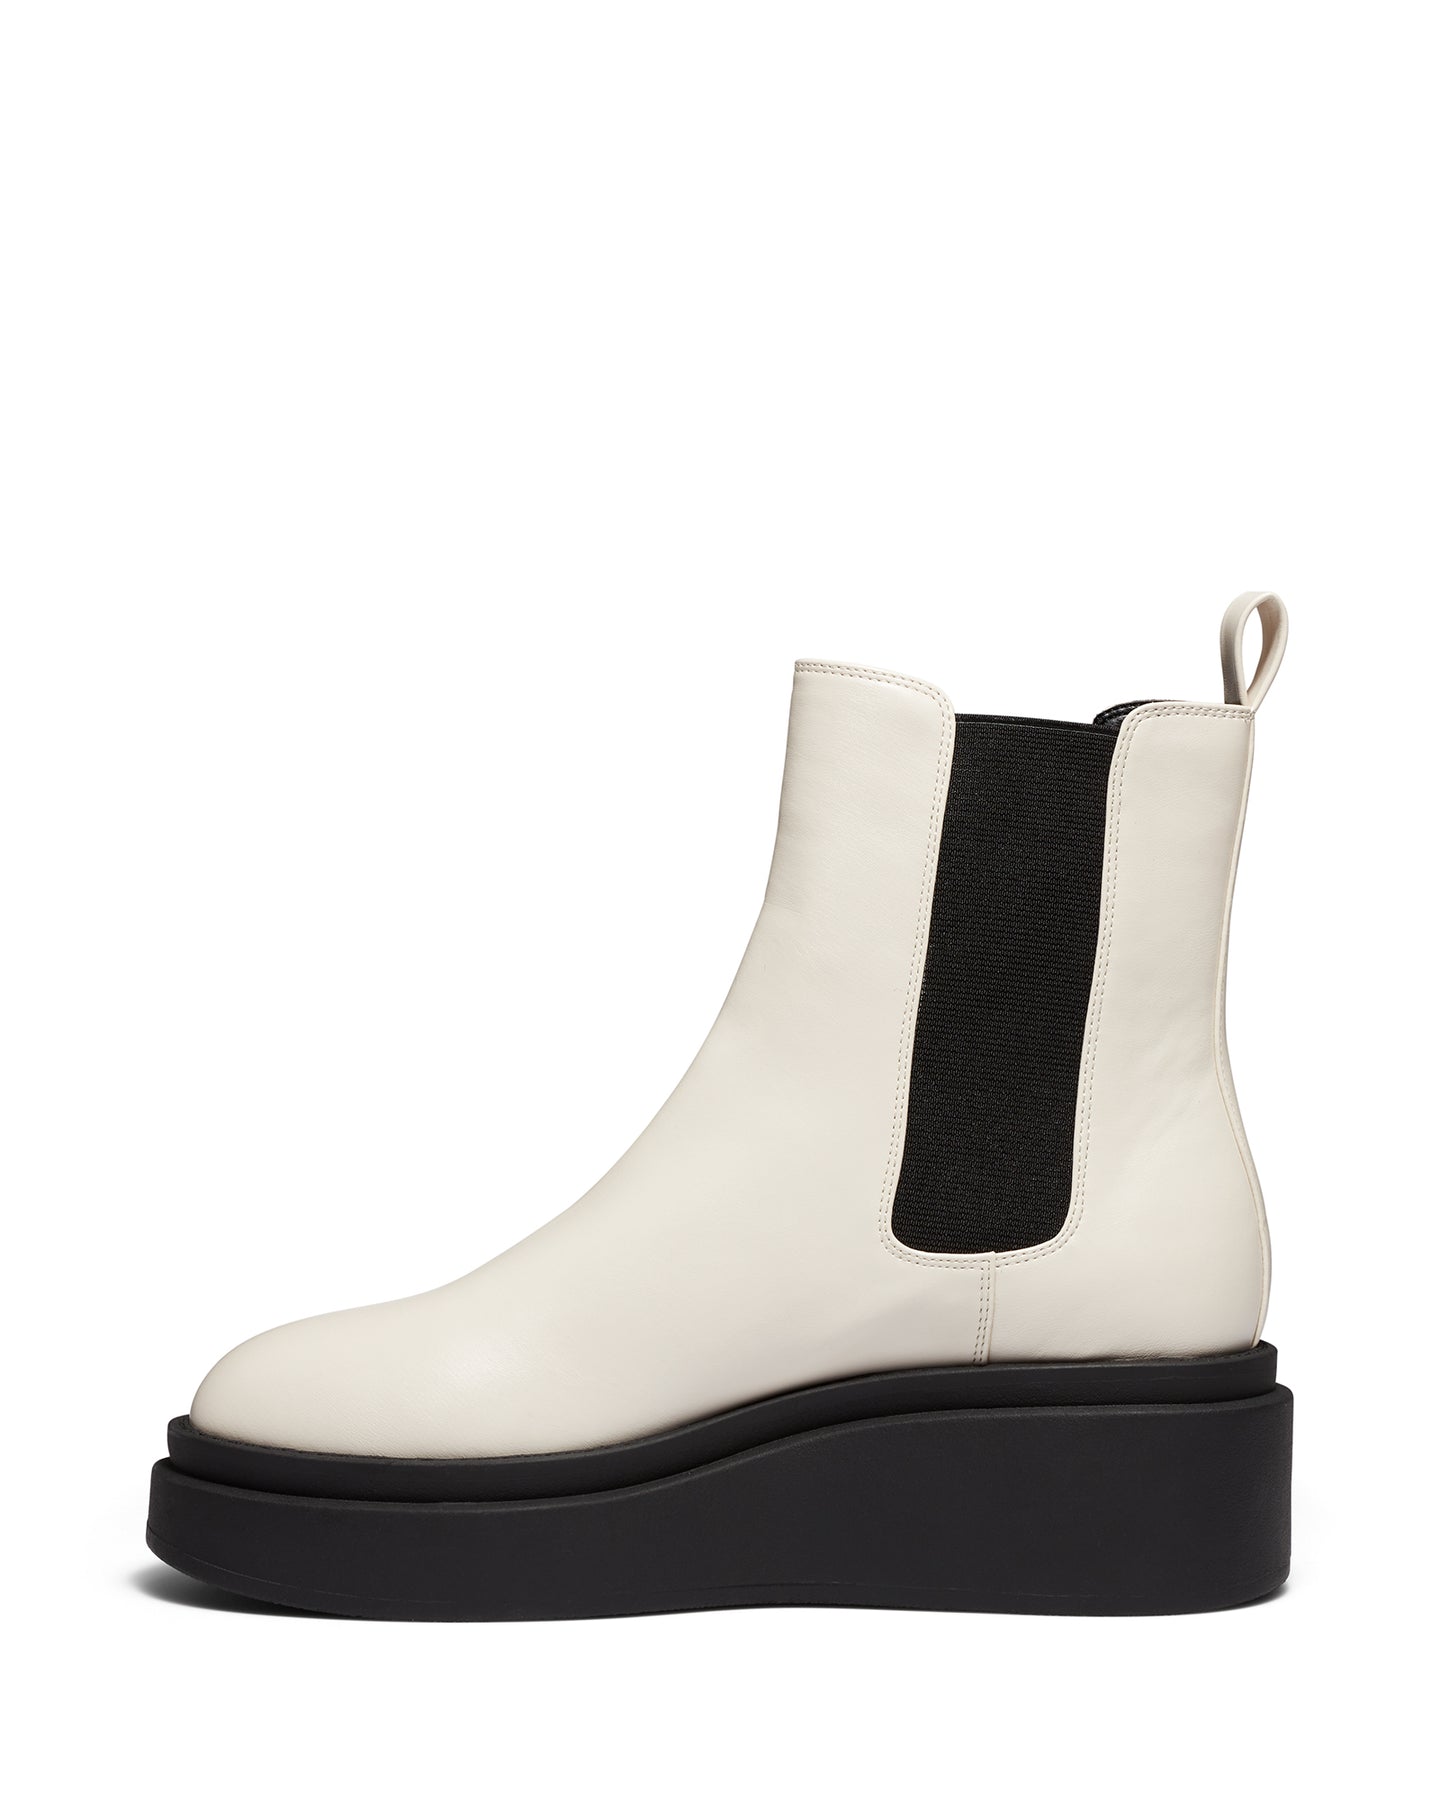 Therapy Shoes Wilde White | Women's Boots | Flatform Wedge | 90's Grunge